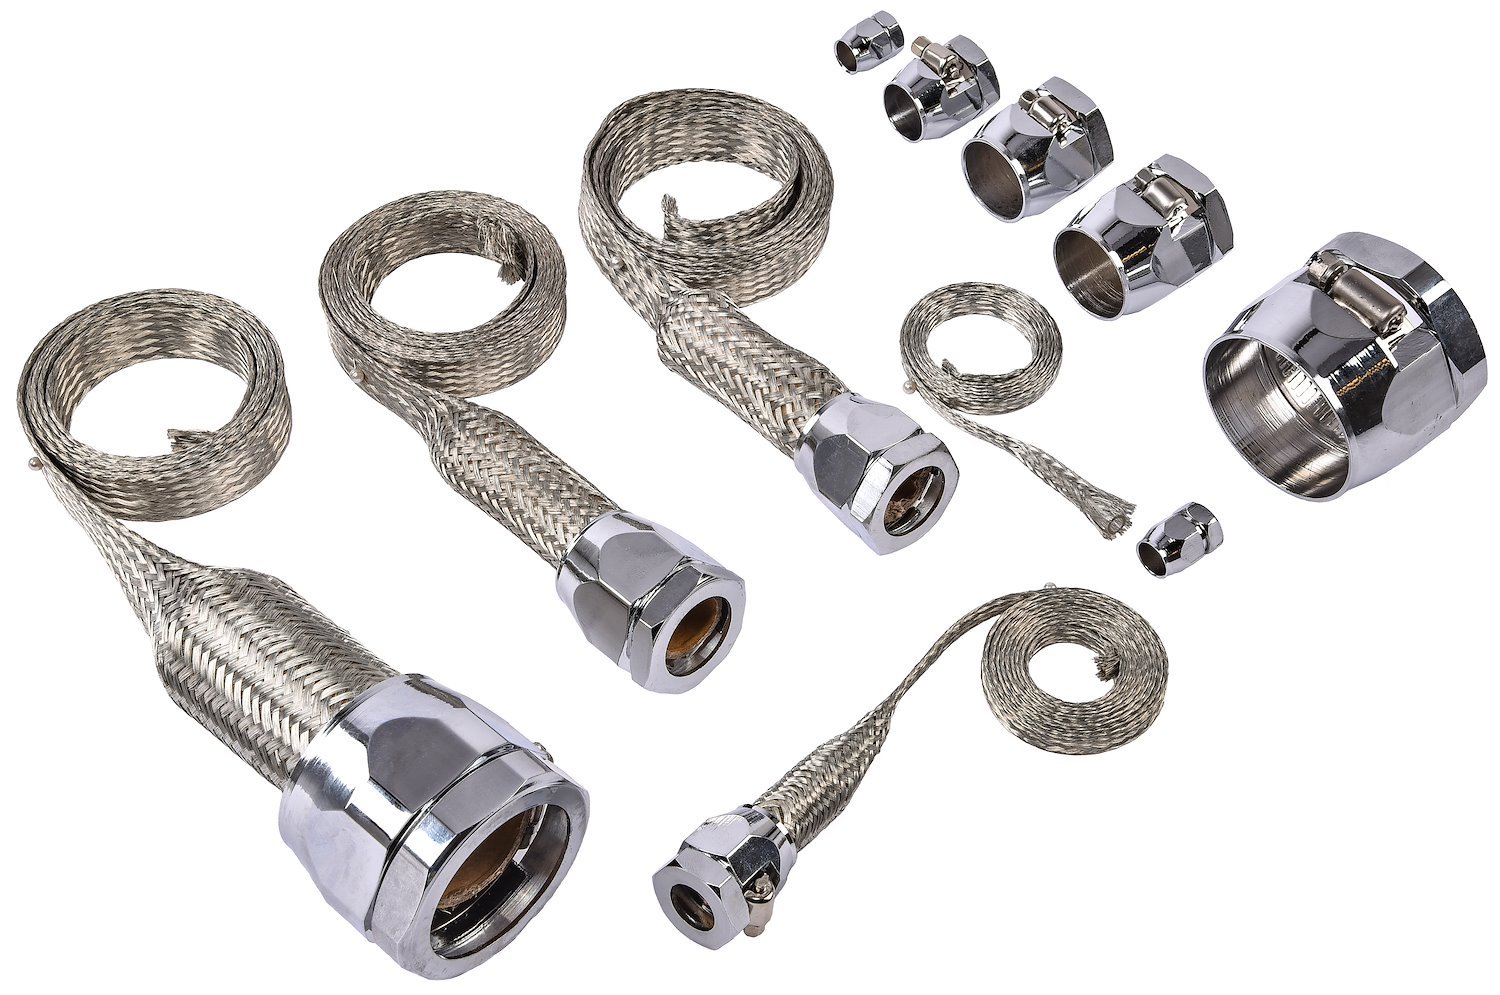 JEGS 50534: Braided Hose Sleeving Kit Includes: Stainless Steel Cut-to-Length  Sleeving, (2) Fuel Line Clamps, (2) Vacuum Line Clamps, (2) Radiator Hose  Clamps, (2) 5/8 in. Heater Hose Clamps, (2) 3/4 in.